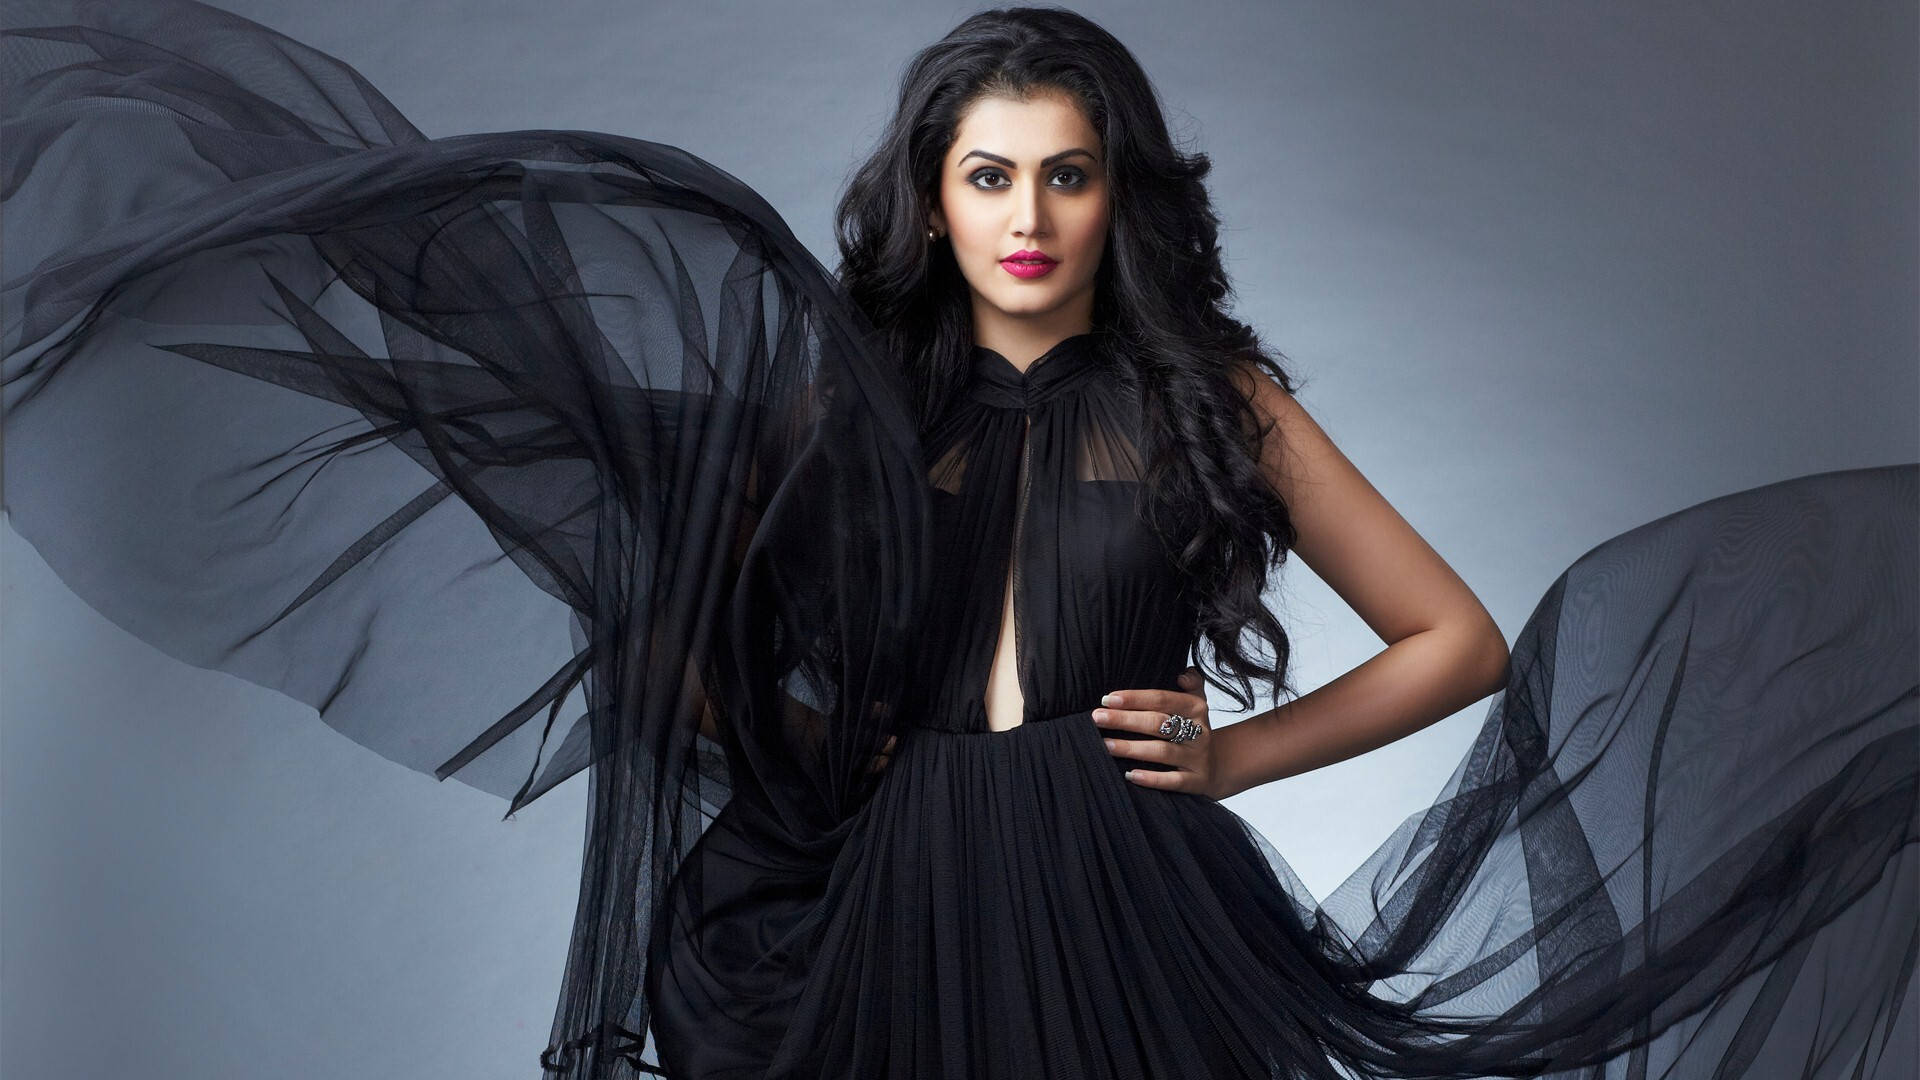 Tapsee Pannu Sort Aftenkjole HD Tapet Wallpaper